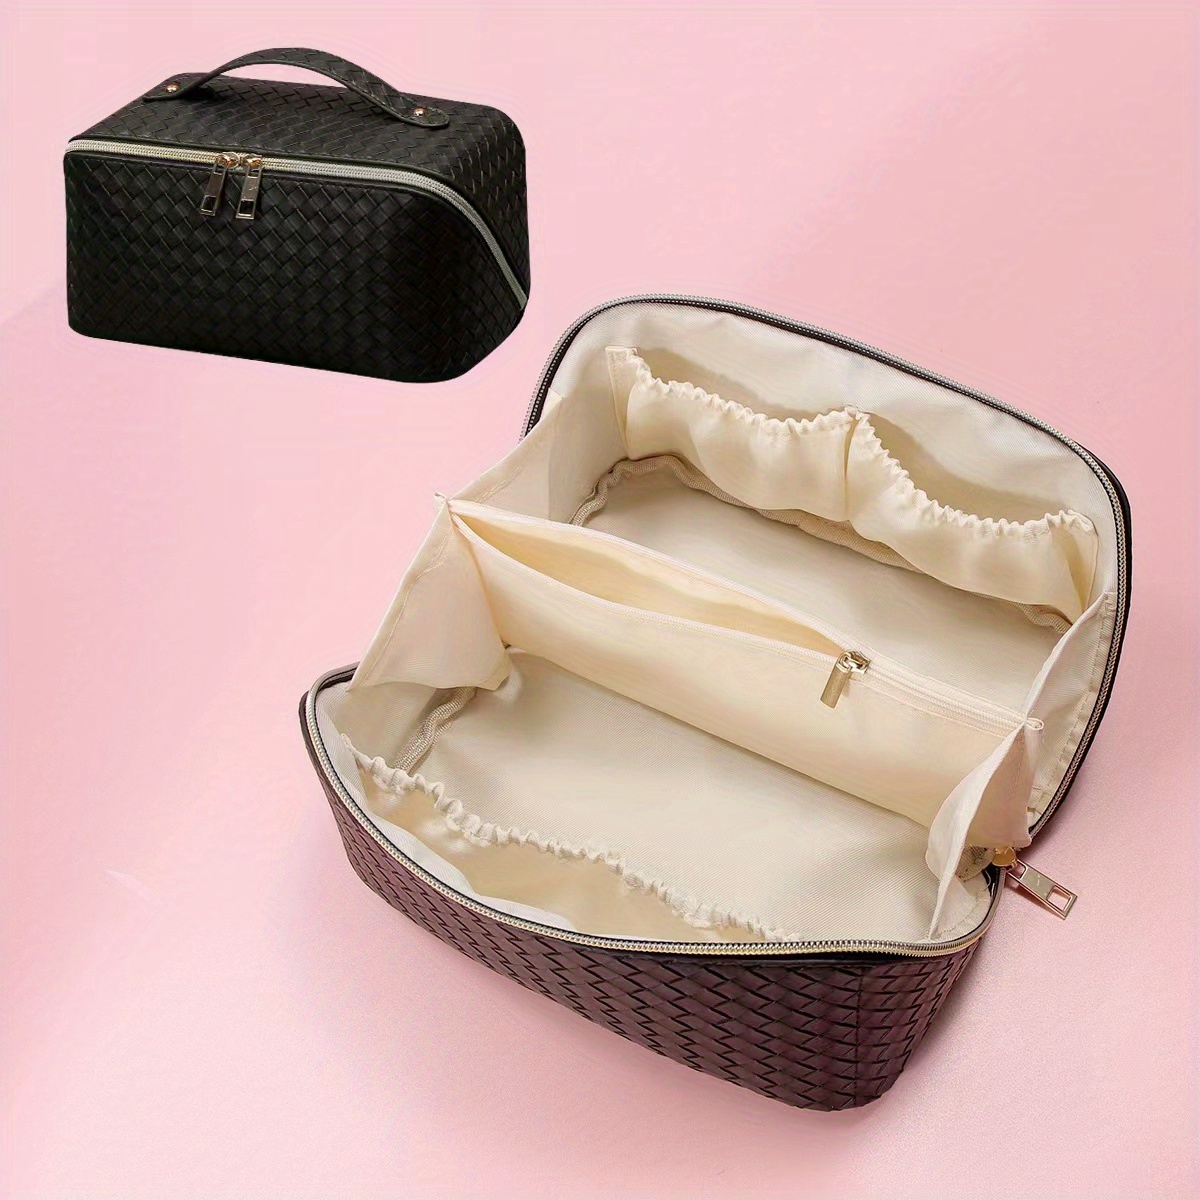  Travel Makeup Bag for Women Large Capacity Cosmetic Bag  Waterproof White Checkered Portable PU Leather Toiletry Bag Organizer  Makeup Brushes Storage Bag with Dividers and Handle : Beauty & Personal